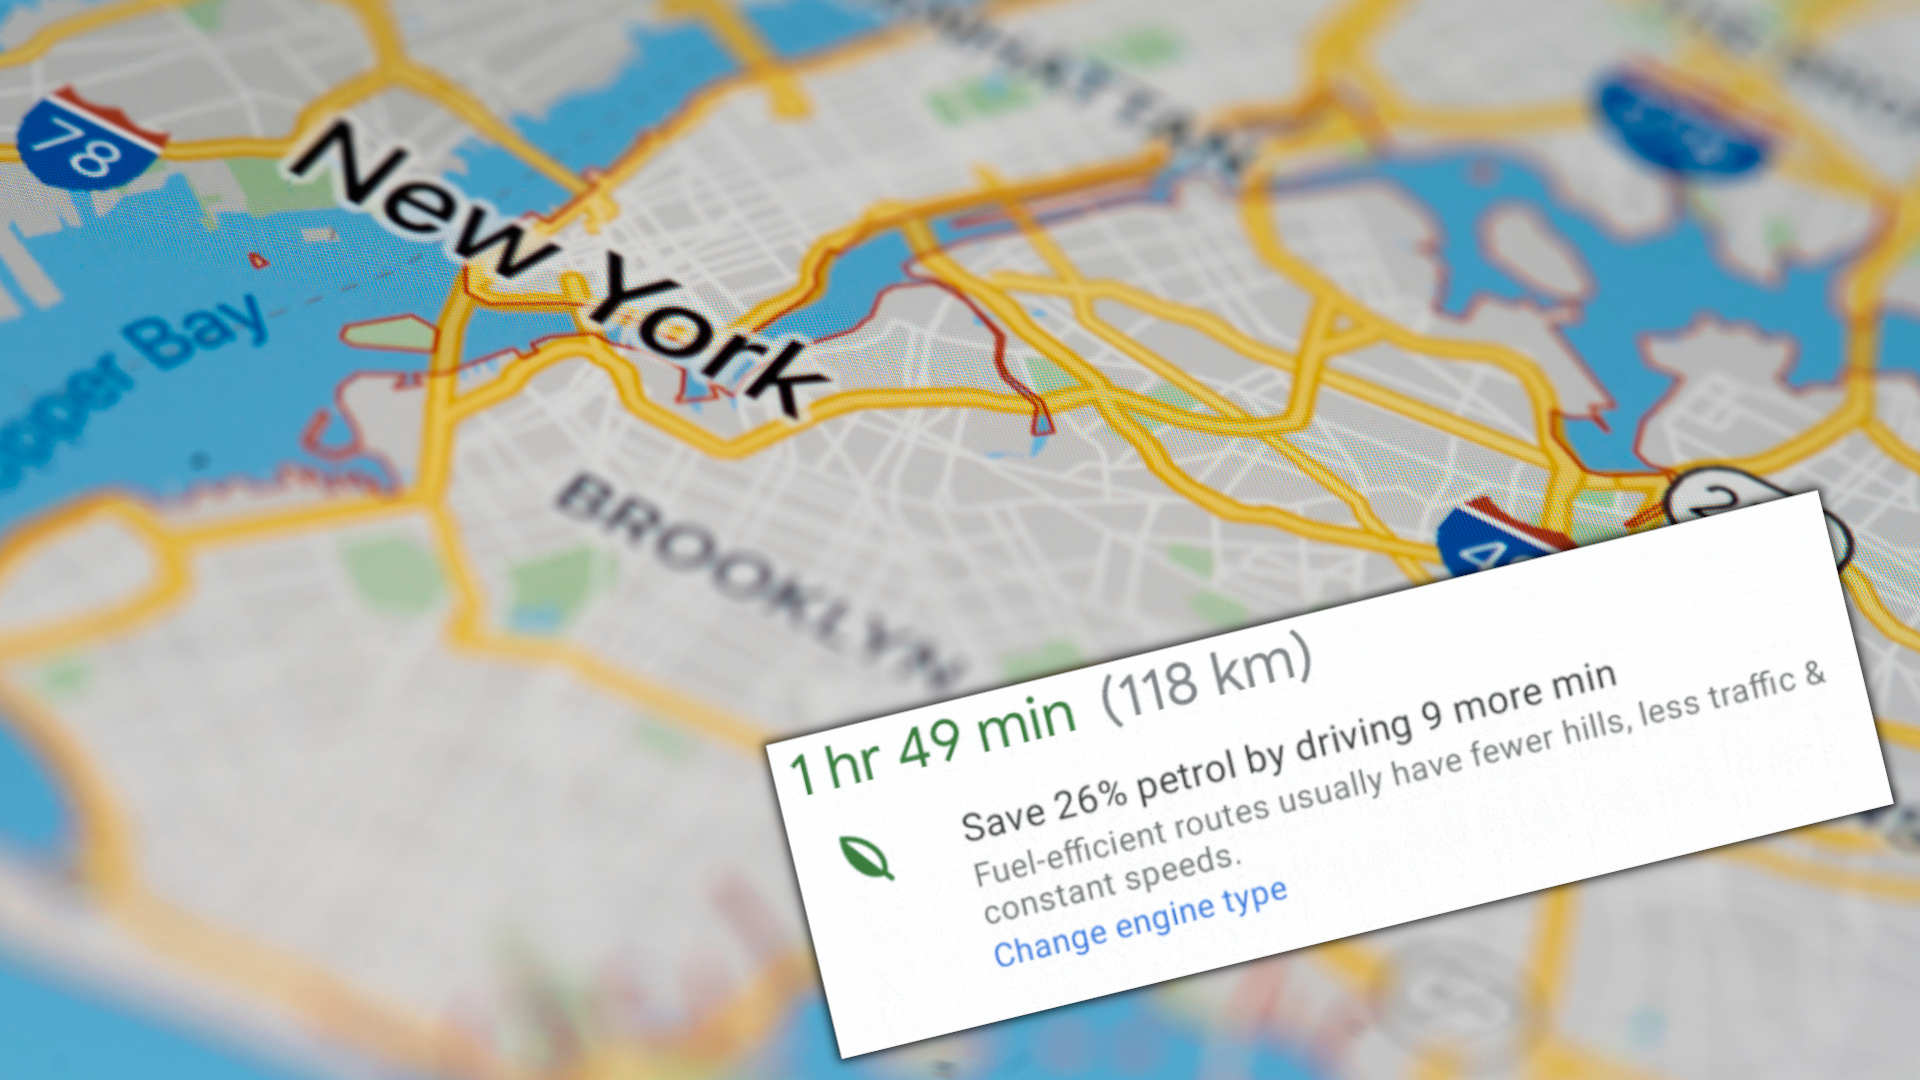 Google Maps’ Eco Route Feature Helped Drivers Drastically Cut Tailpipe Emissions